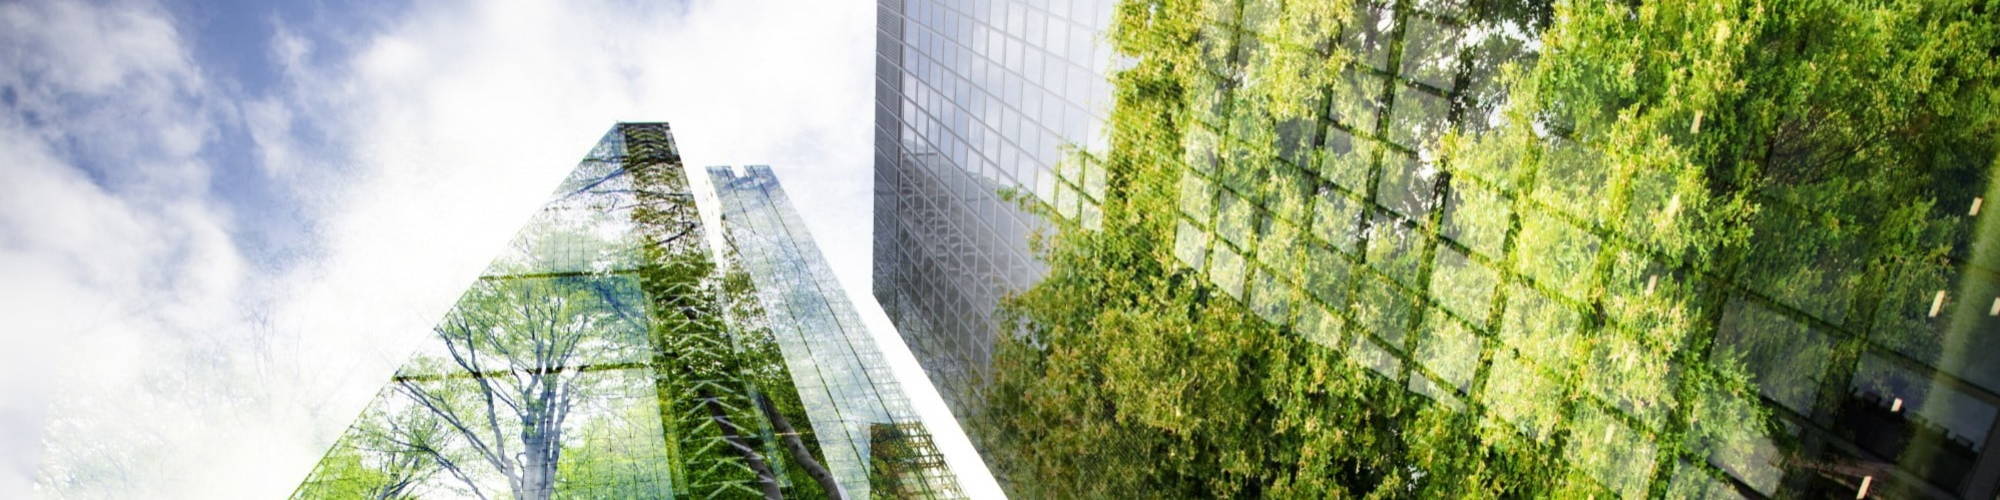 Skyscrapers with trees reflected in the glass